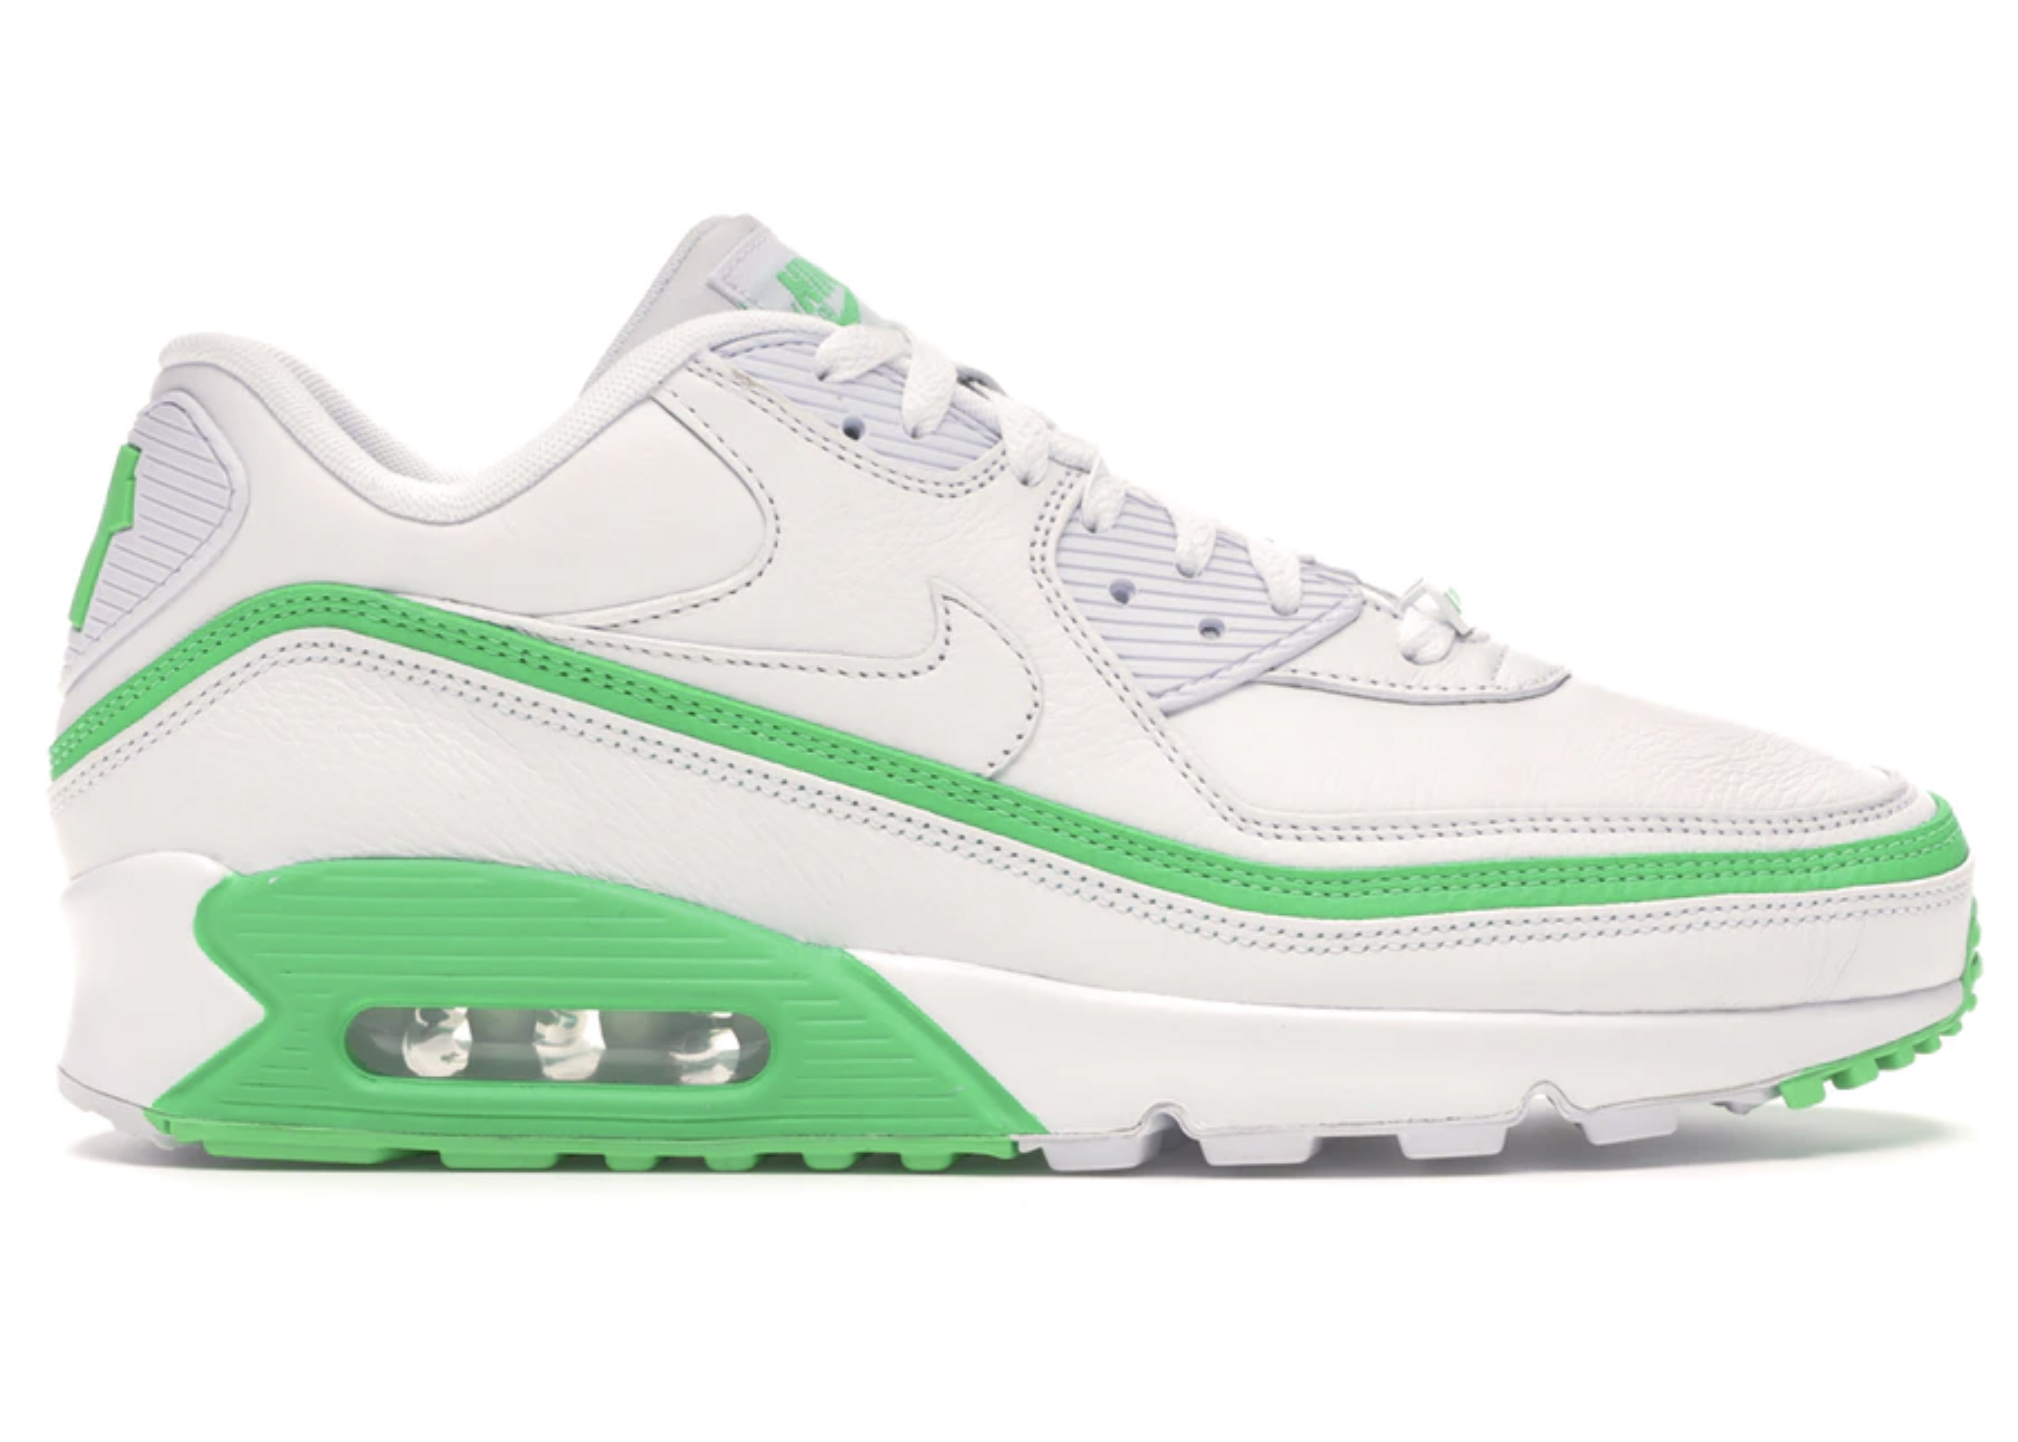 Nike Air Max 90 Undefeated White Green -